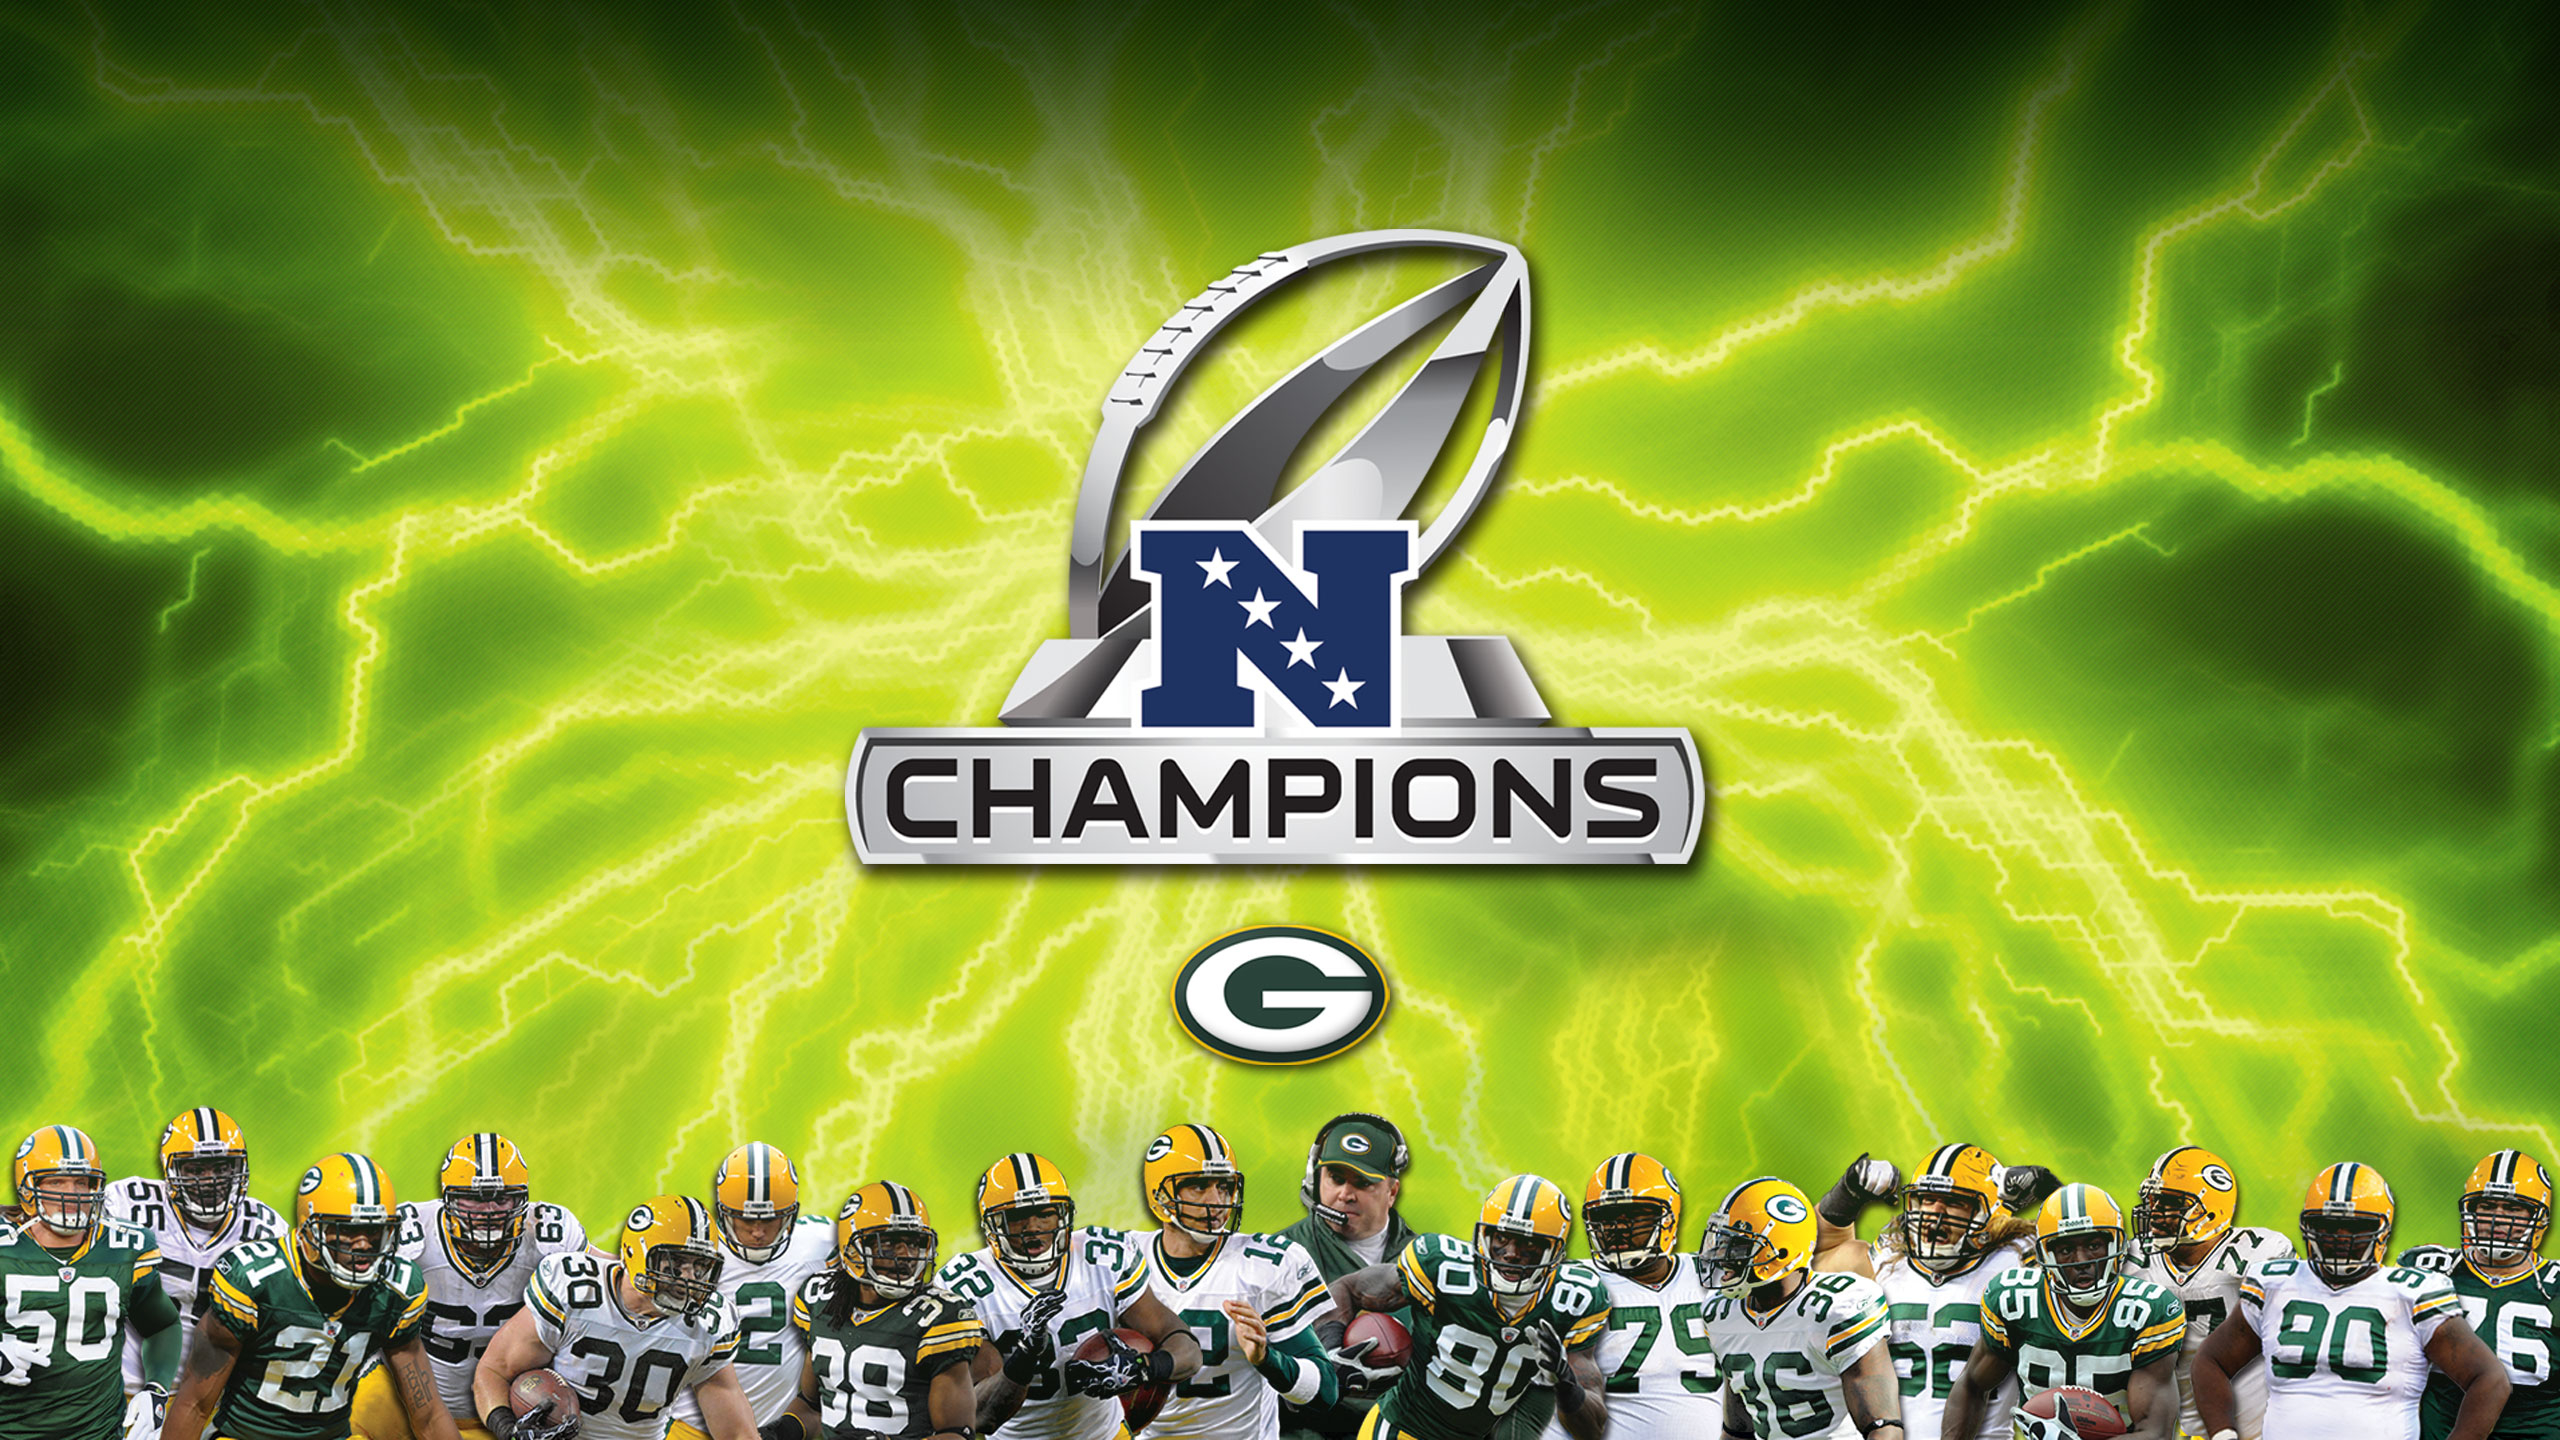 2560x1440 Free download Free Super Bowl Champs Packers Wallpapers Super Bowl Champs [] for your Desktop, Mobile \u0026 Tablet | Explore 48+ Free Super Bowl Wallpapers | Super Bowl 50 Wallpapers, Super Bowl